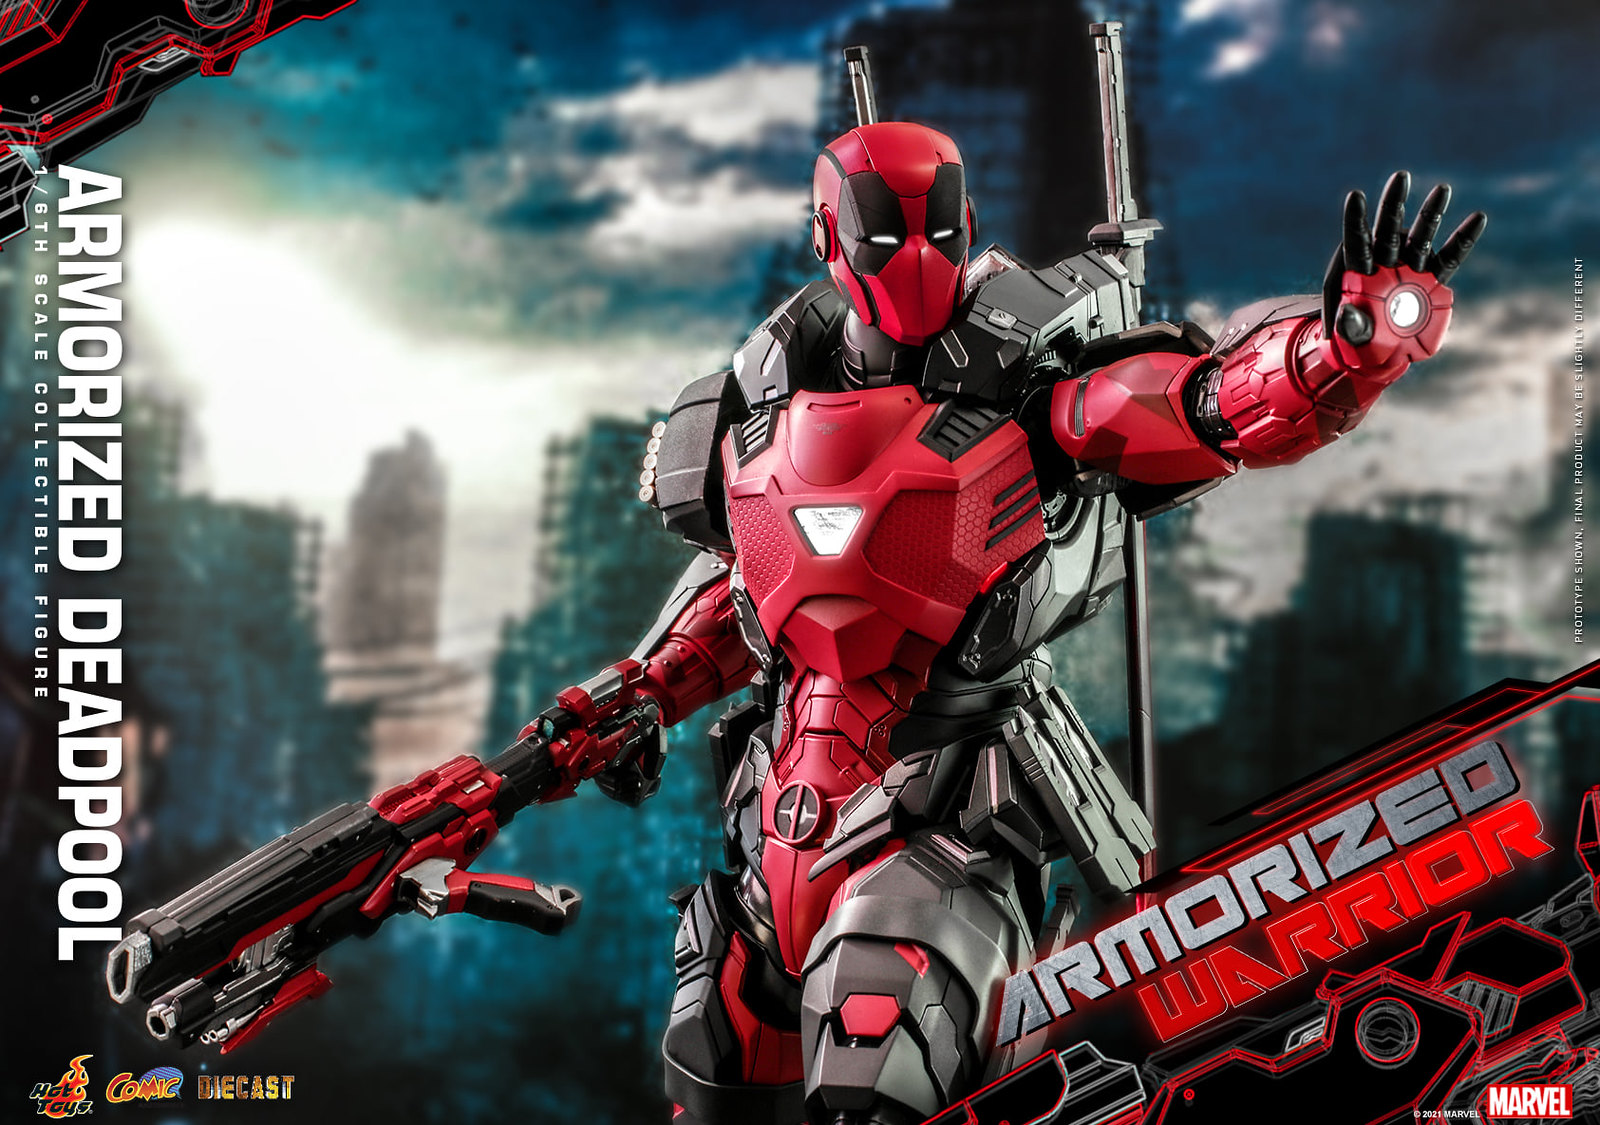 NEW PRODUCT: Hot Toys Armorized Warrior - 1/6th scale Armorized Deadpool Collectible Figure [Armorized Warrior Collection] 51311964814_a0c1e49642_h